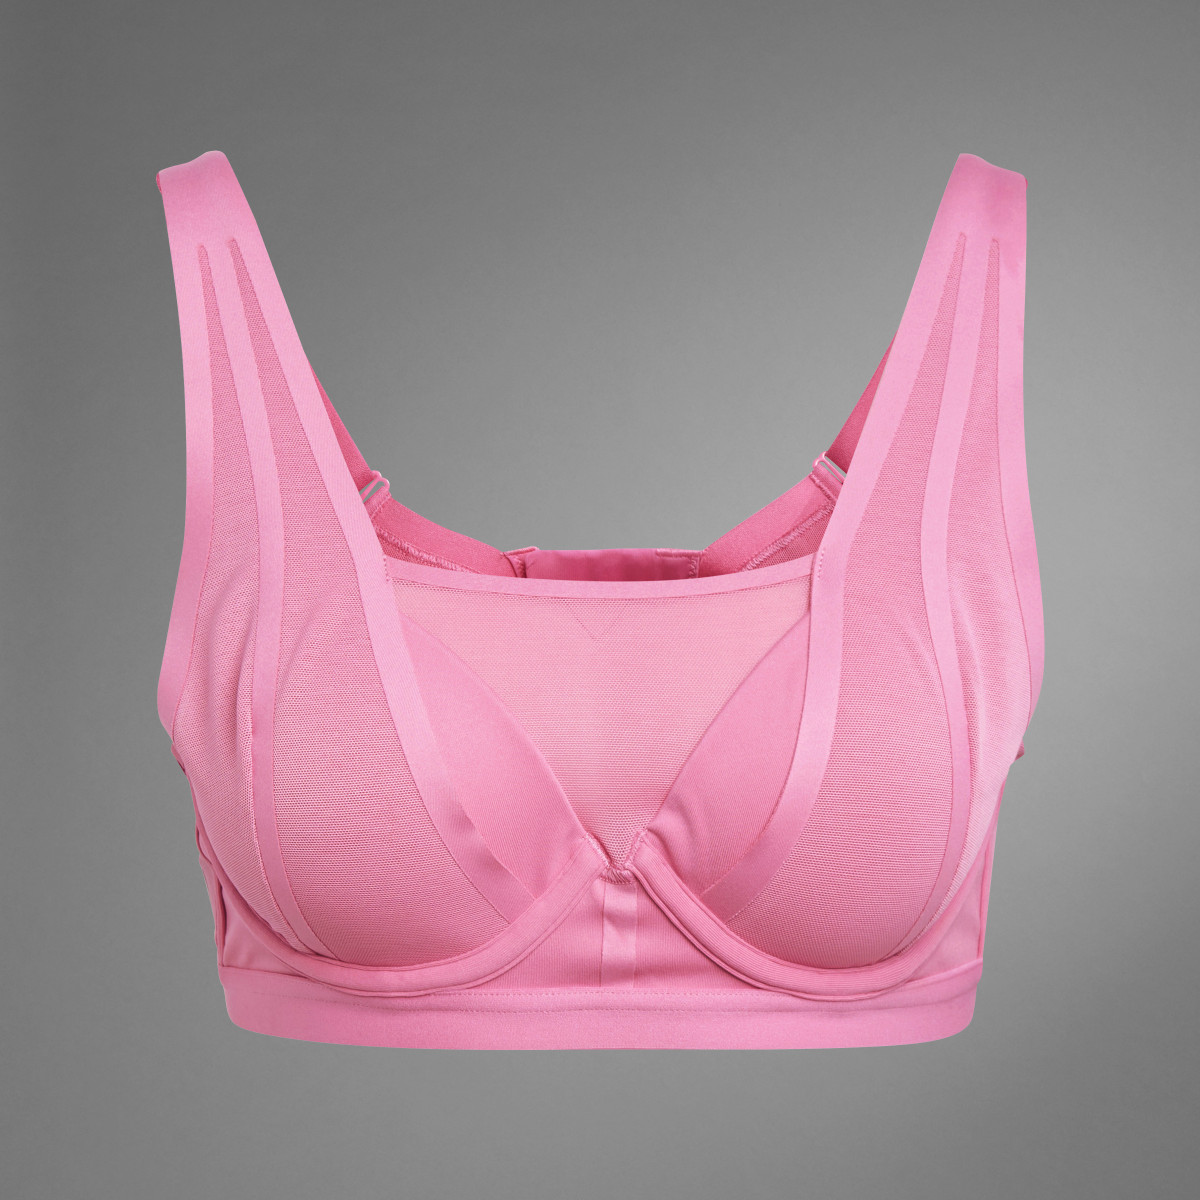 Adidas Brassière de training TLRD Impact Luxe Collective Power Maintien fort. 10